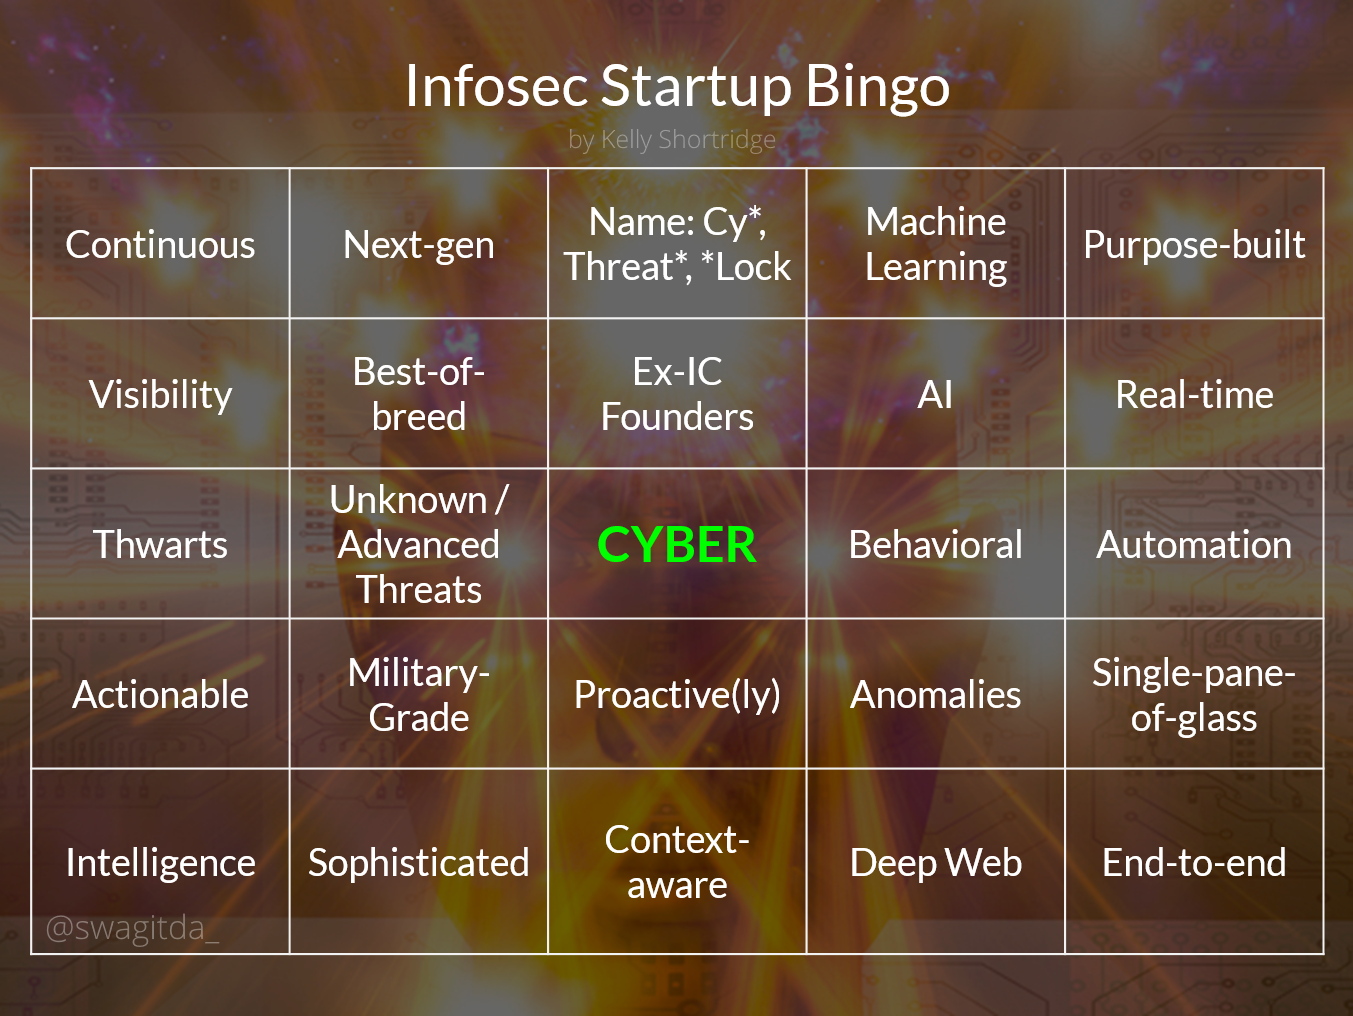 Infosec Startup Buzzword Bingo card for 2017. The buzzwords, from top left to bottom right, include: Continuous. Next-gen. Names with Cy, Threat, or Lock in them. Machine learning. Purpose-built. Visibility. Best-of-breed. Ex-intelligence community founders. AI. Real-time. Thwarts. Unknown or Advanced Threats. Cyber (the center square). Behavioral. Automation. Actionable. Military-grade. Proactive. Anomalies. Single-pane-of-glass. Intelligence. Sophisticated. Context-aware. Deep web. End-to-end.